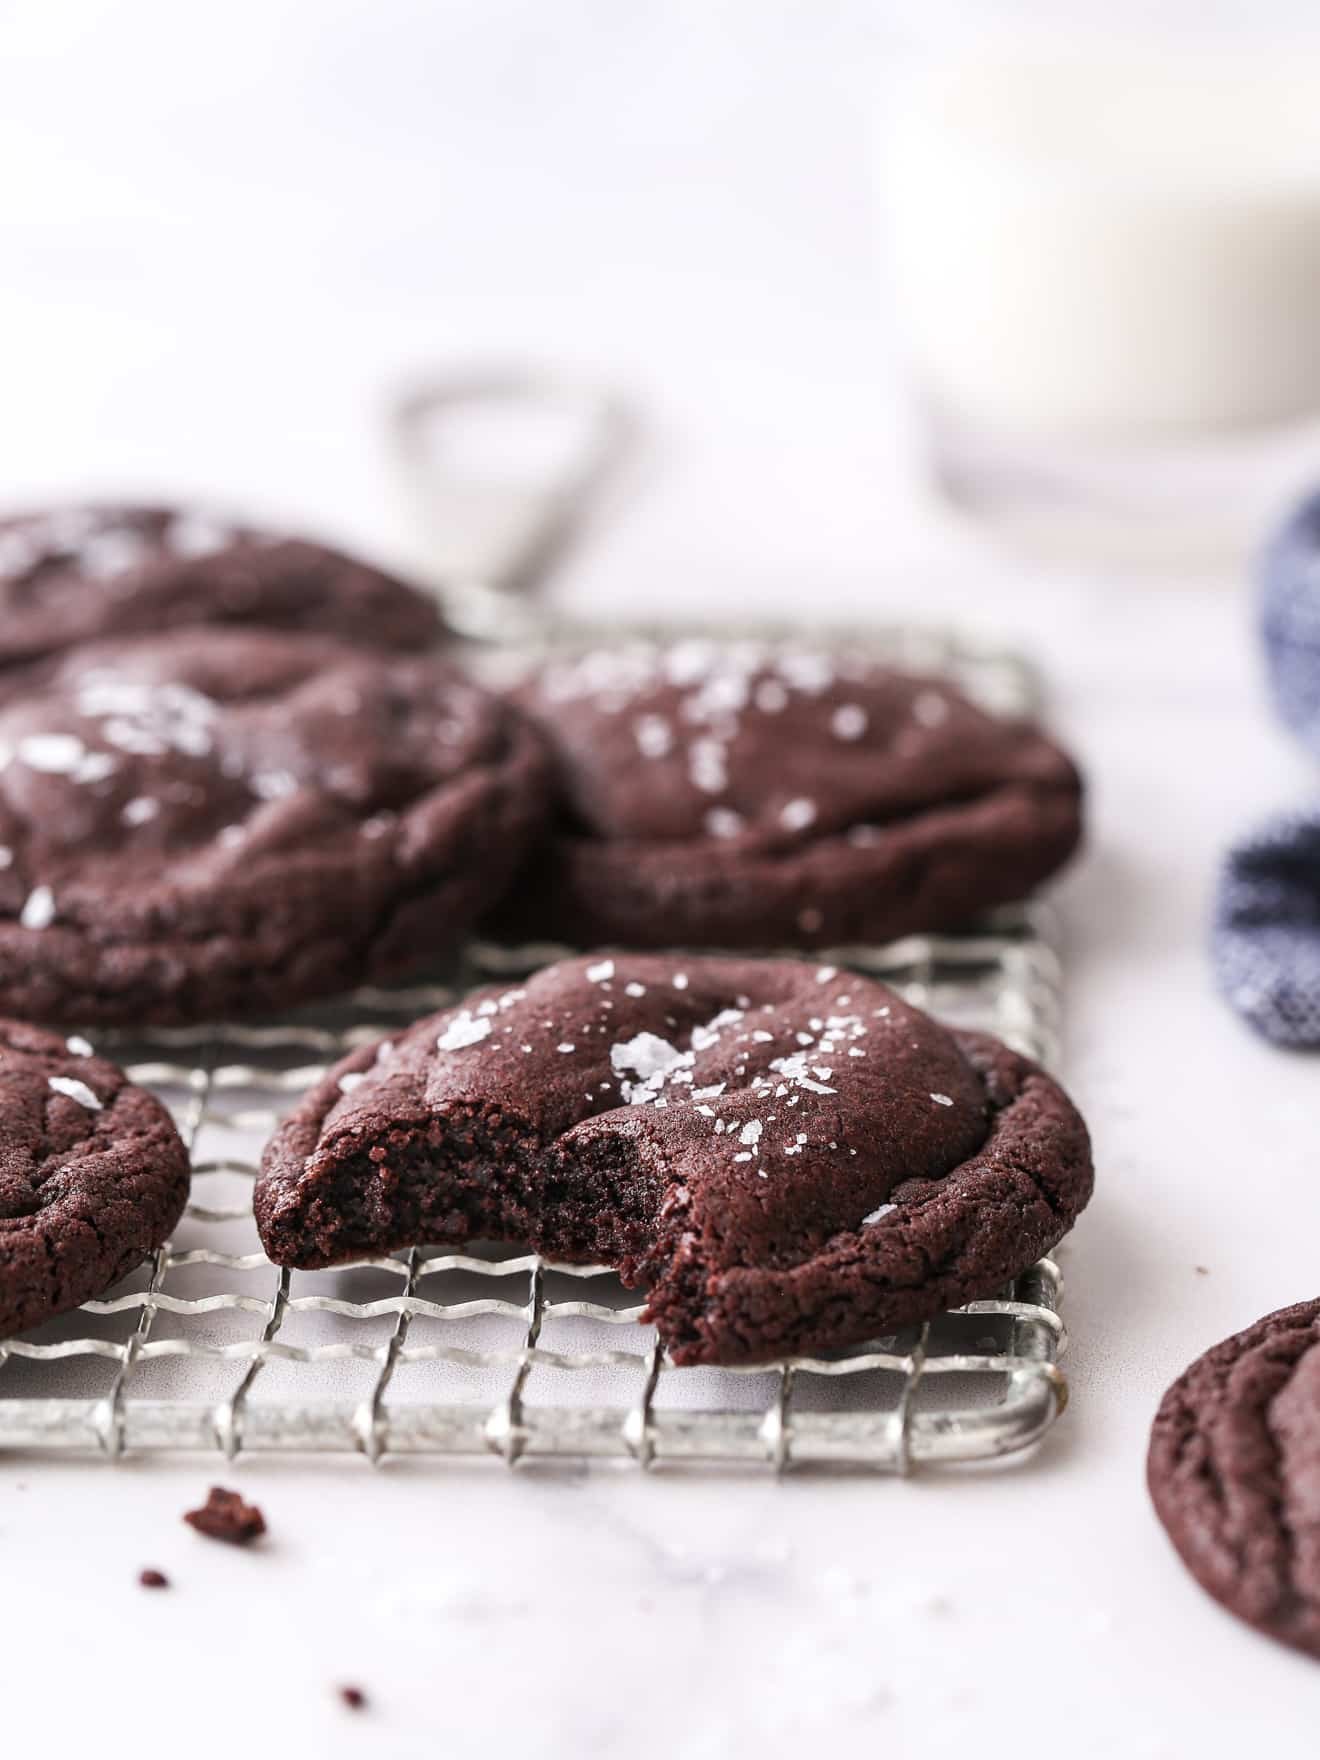 The 8 Best Cookie Sheets for Baking in 2021